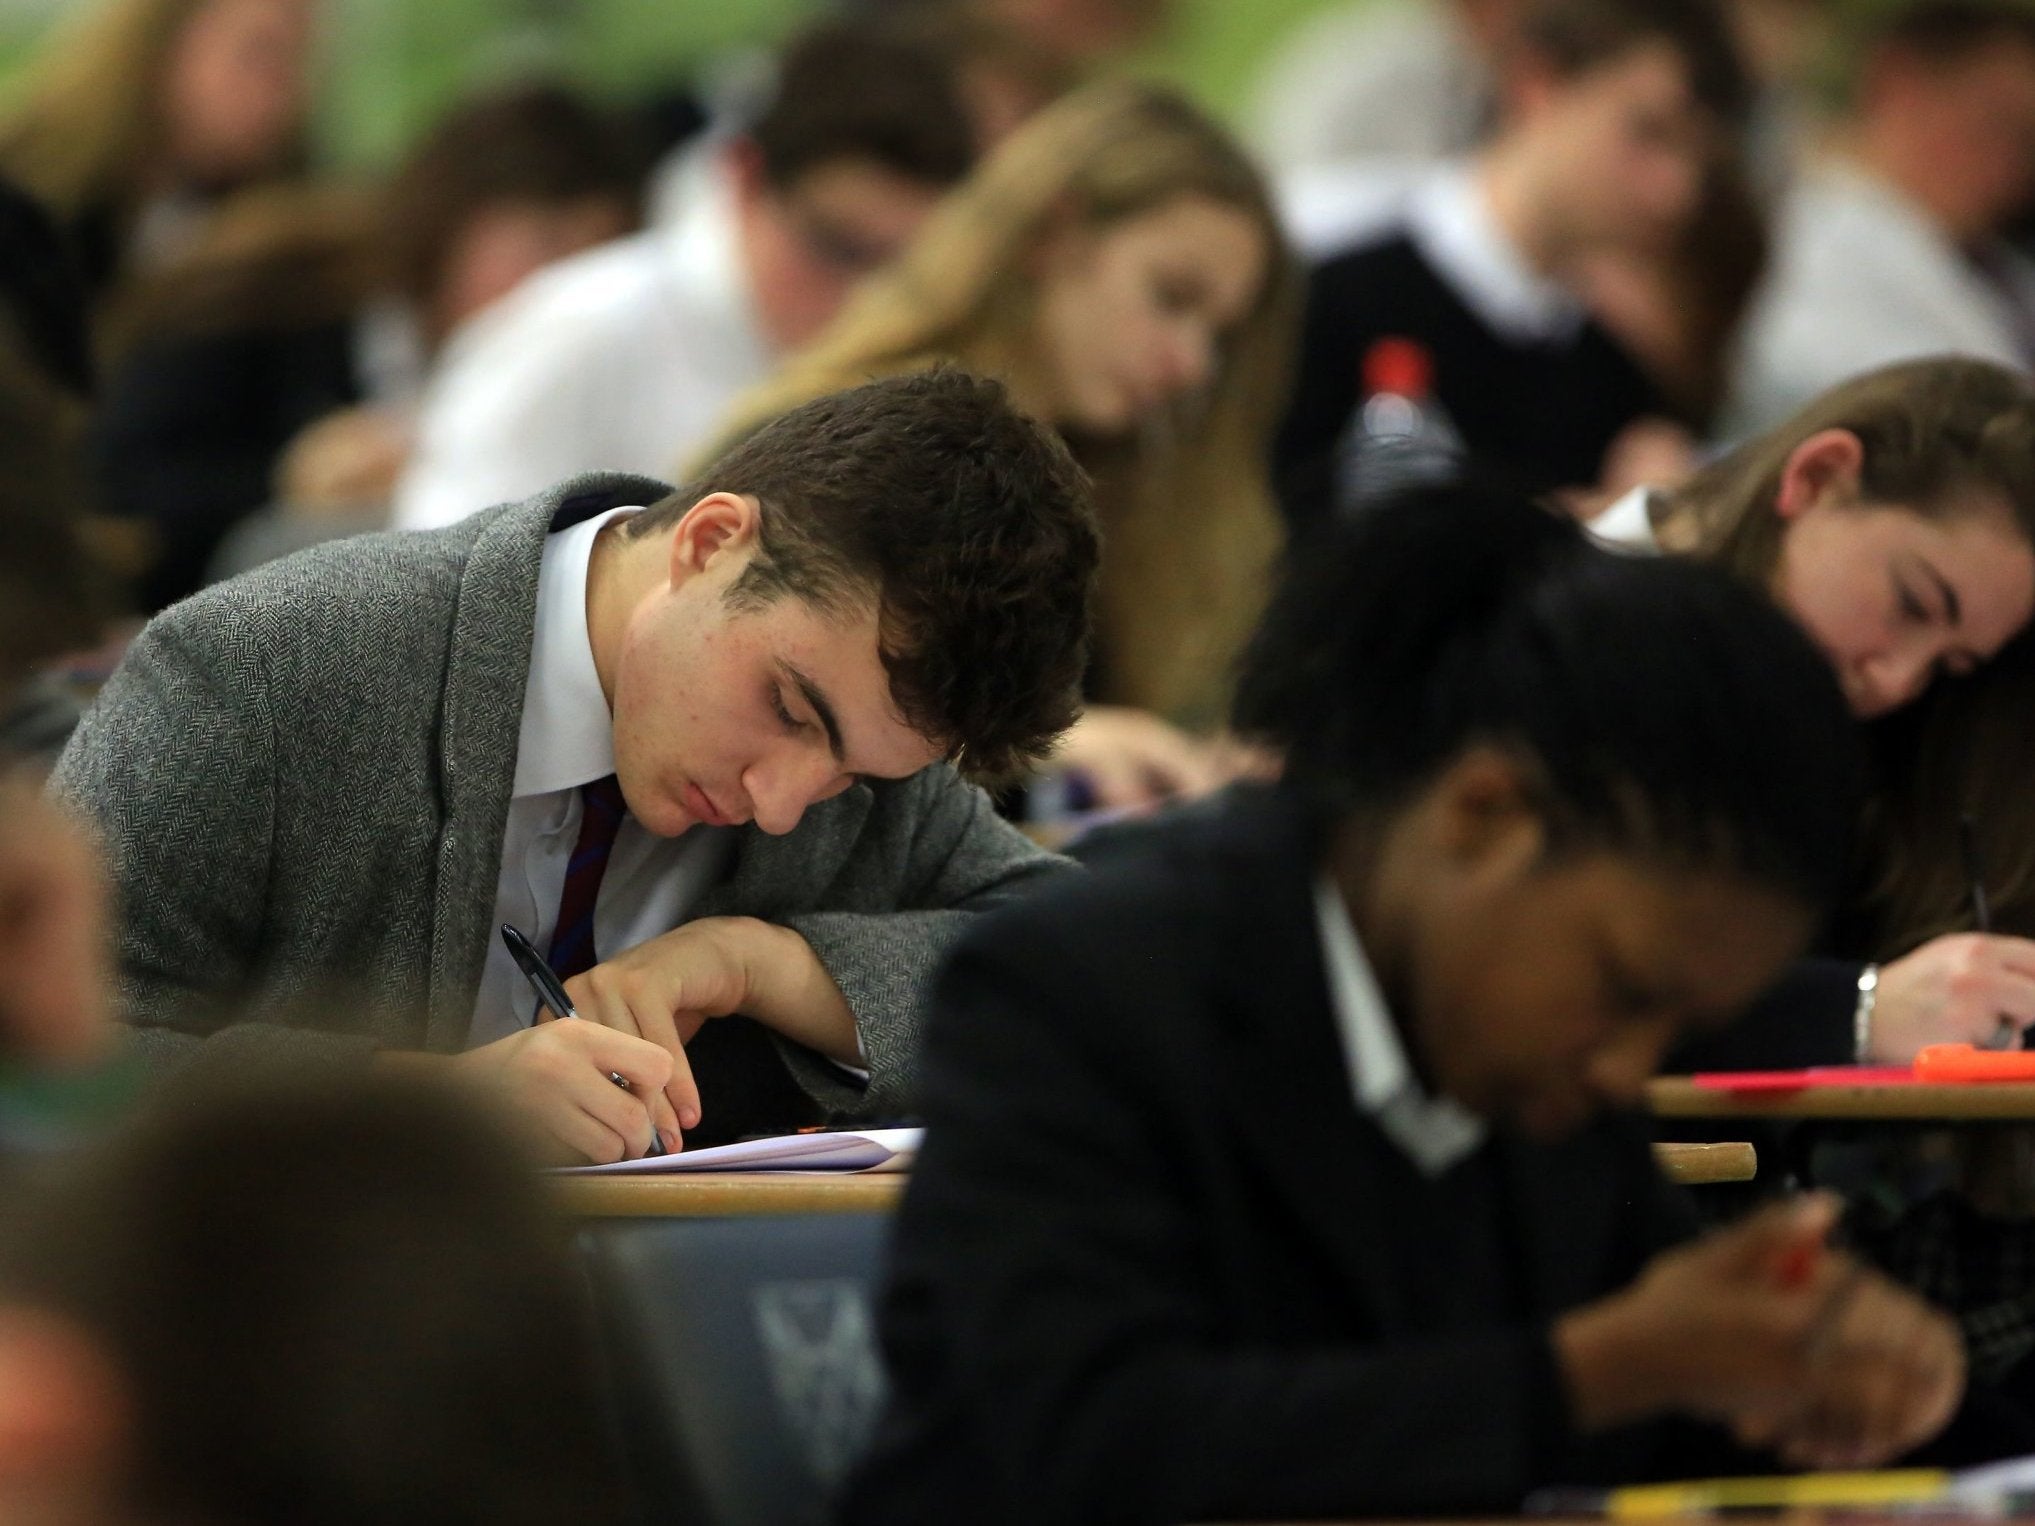 Pupils in London are more likely to say they have had a private tutor than any other part of England – with 41 per cent admitting to seeking tuition